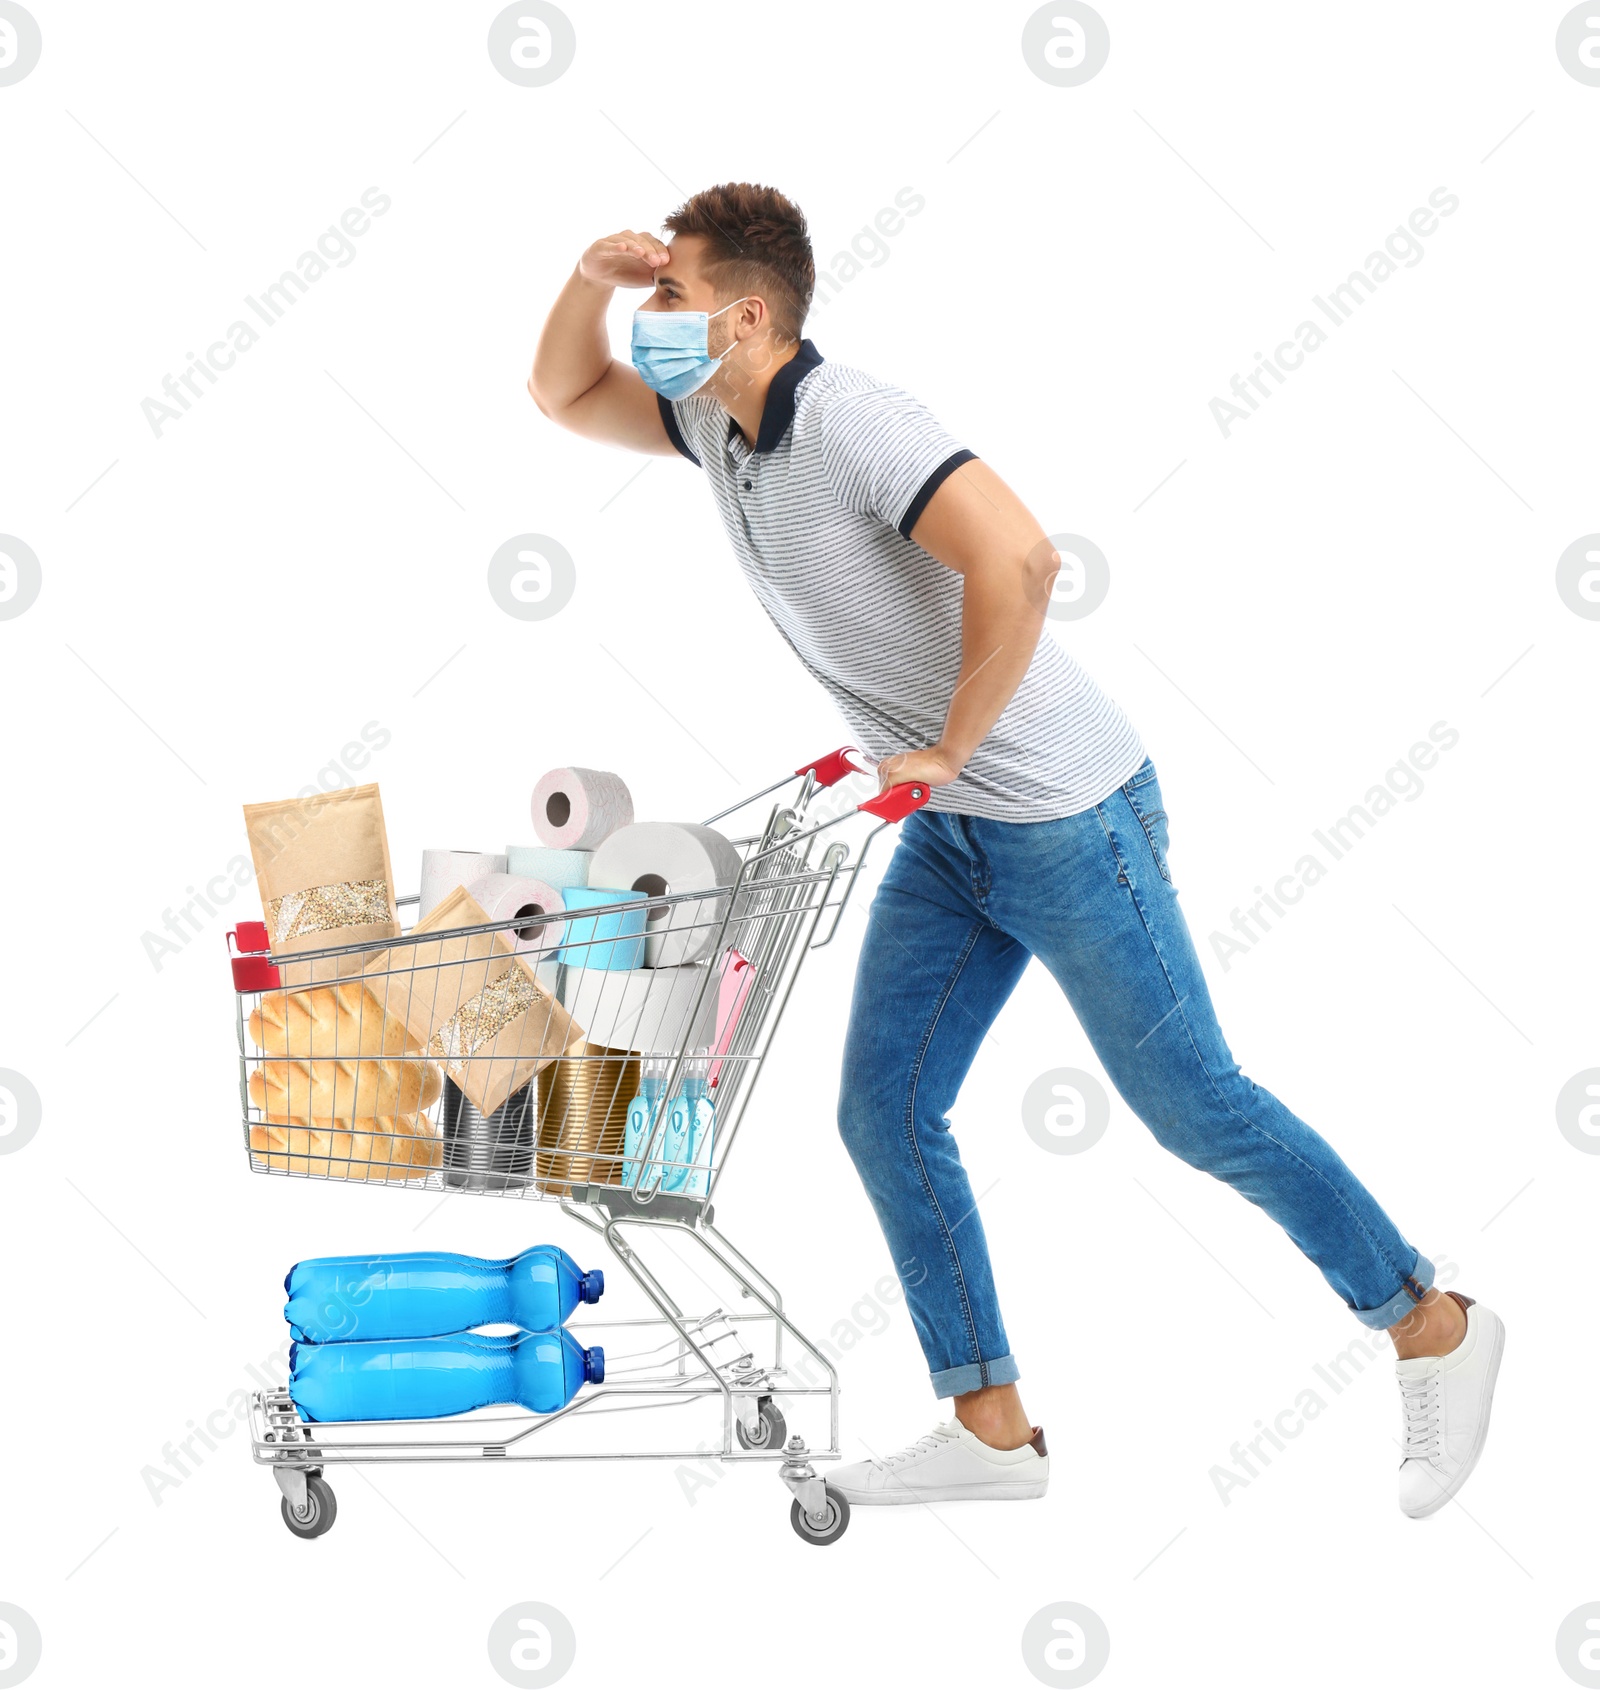 Image of Young man in medical mask and shopping cart with purchases on white background. Coronavirus pandemic 